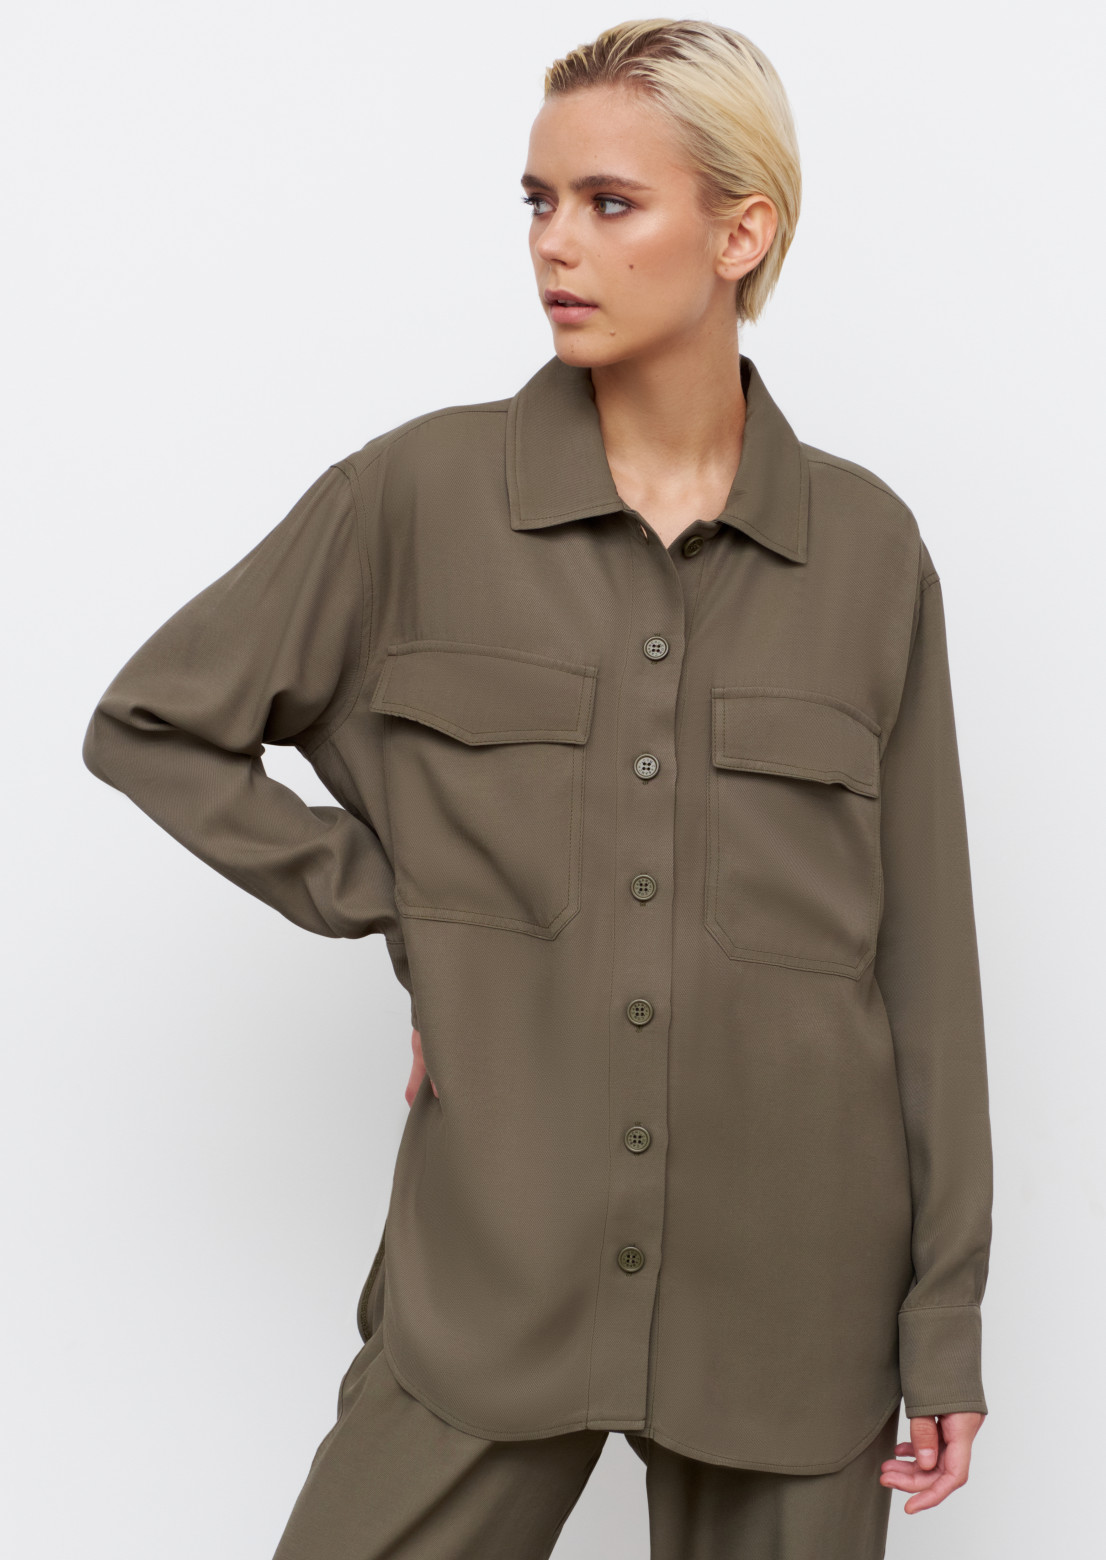 Grey-green colour shirt with pockets